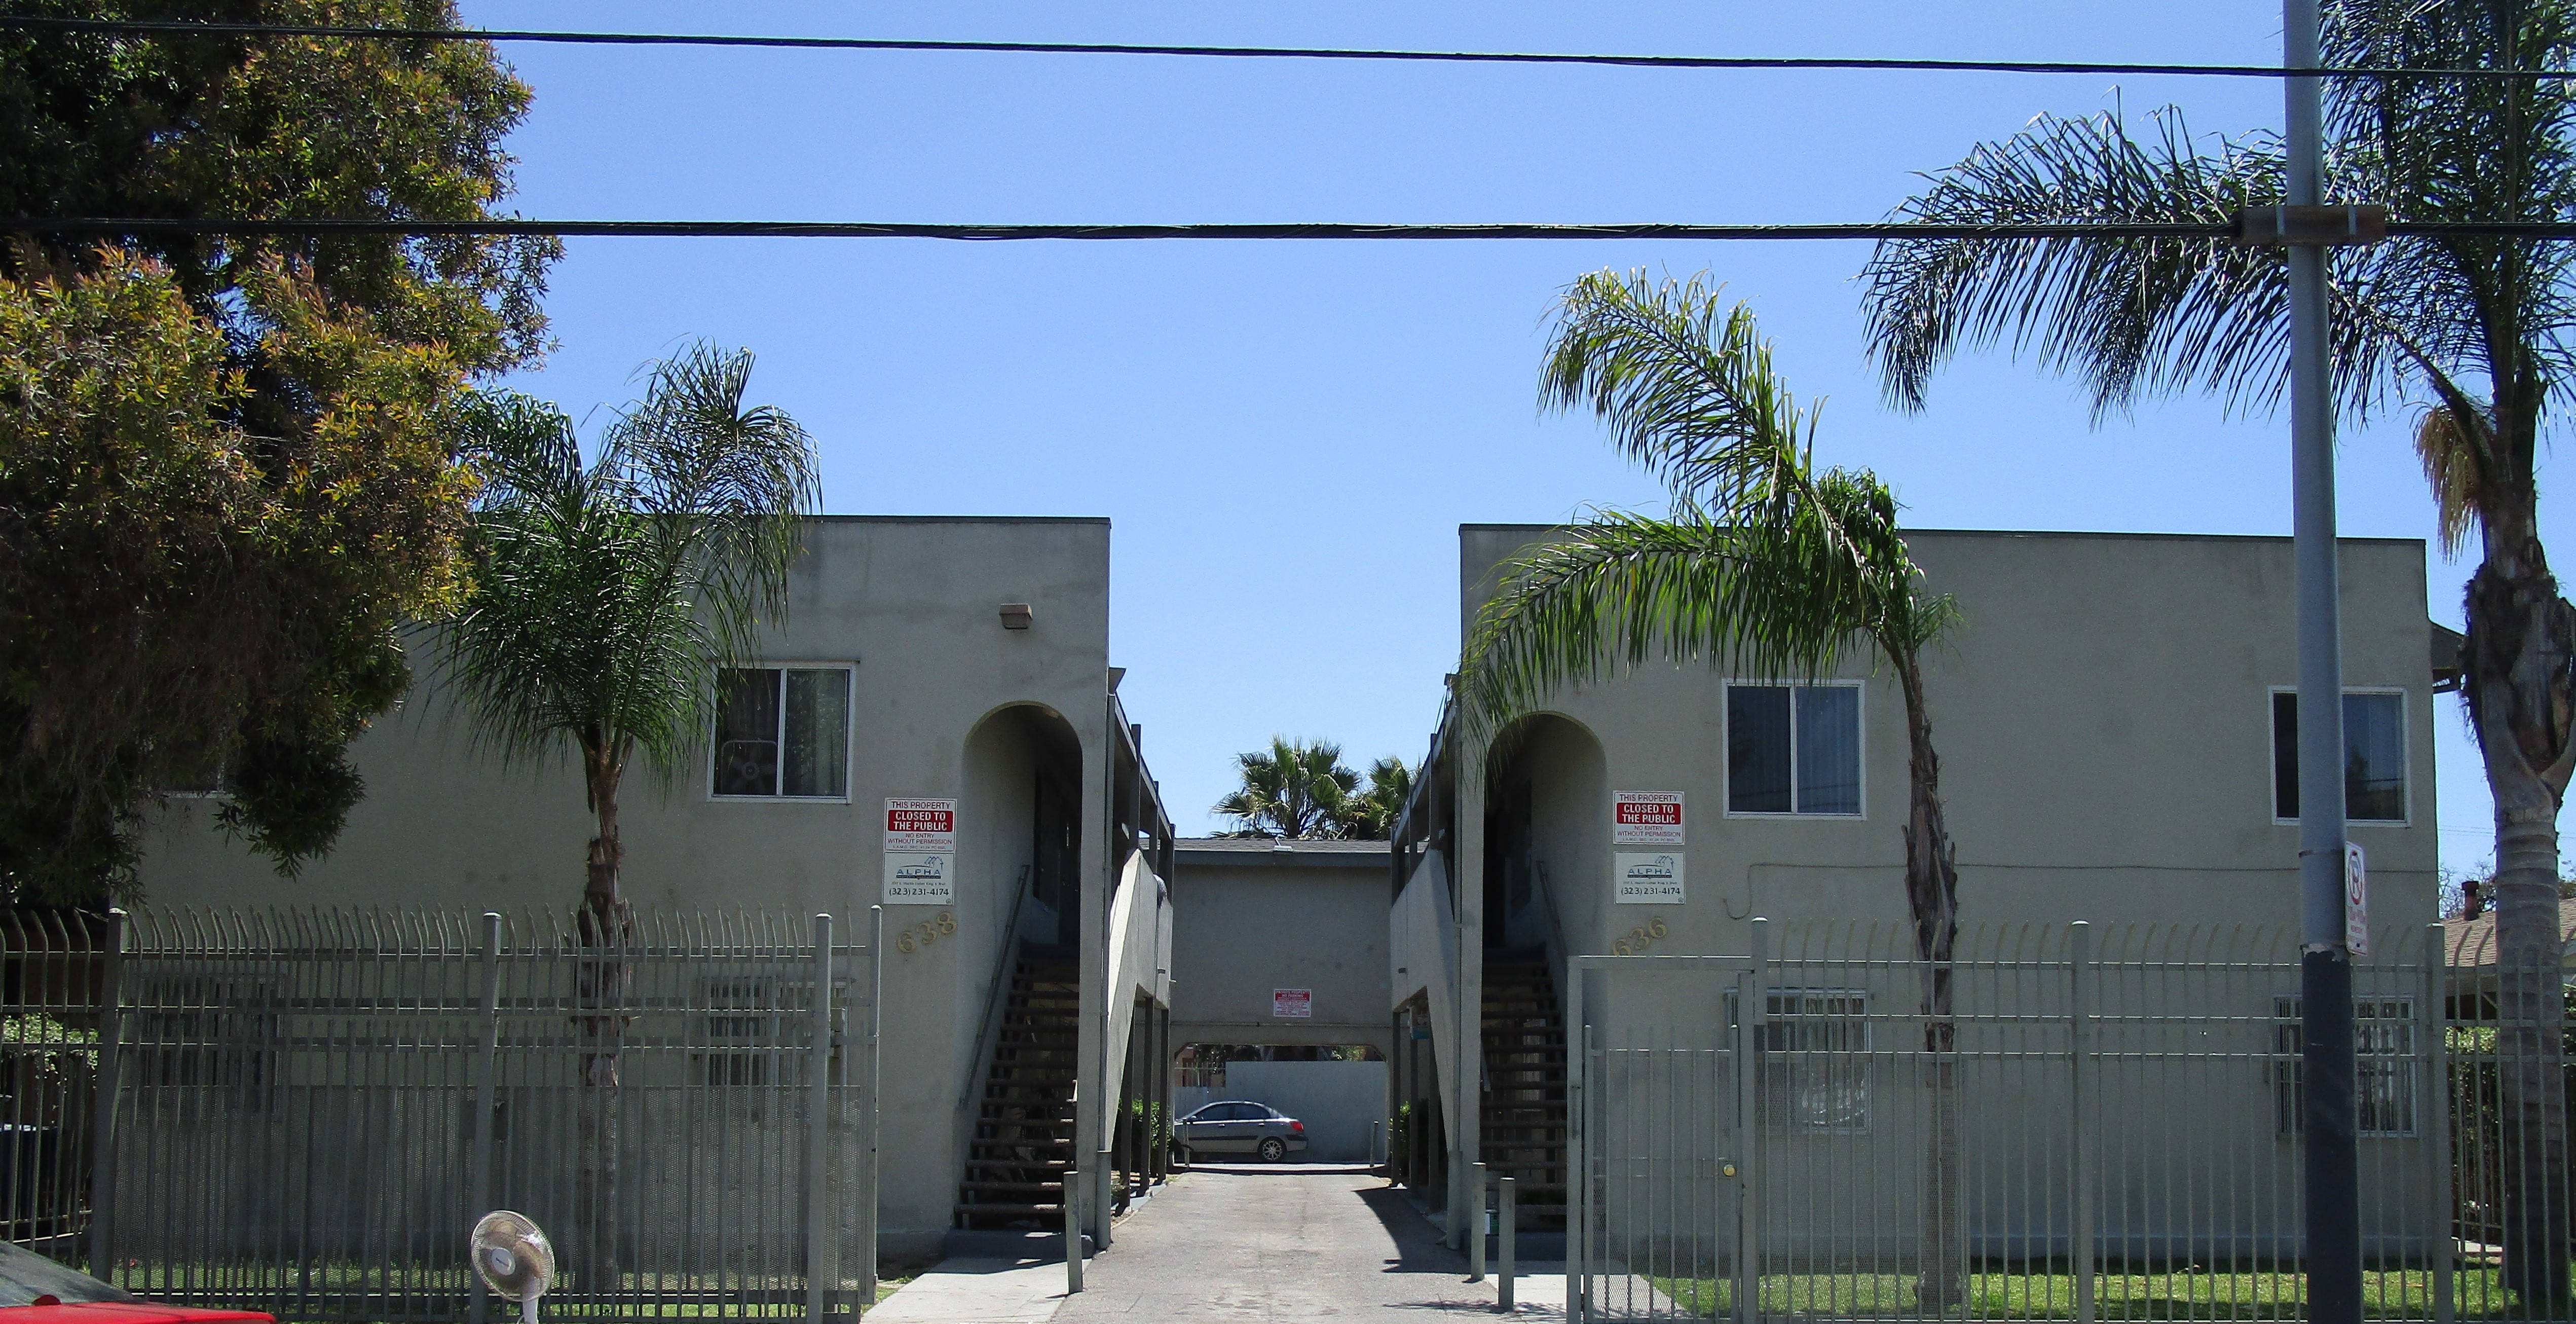 Street view of a gated property with twobuildings and driveway between the buildings